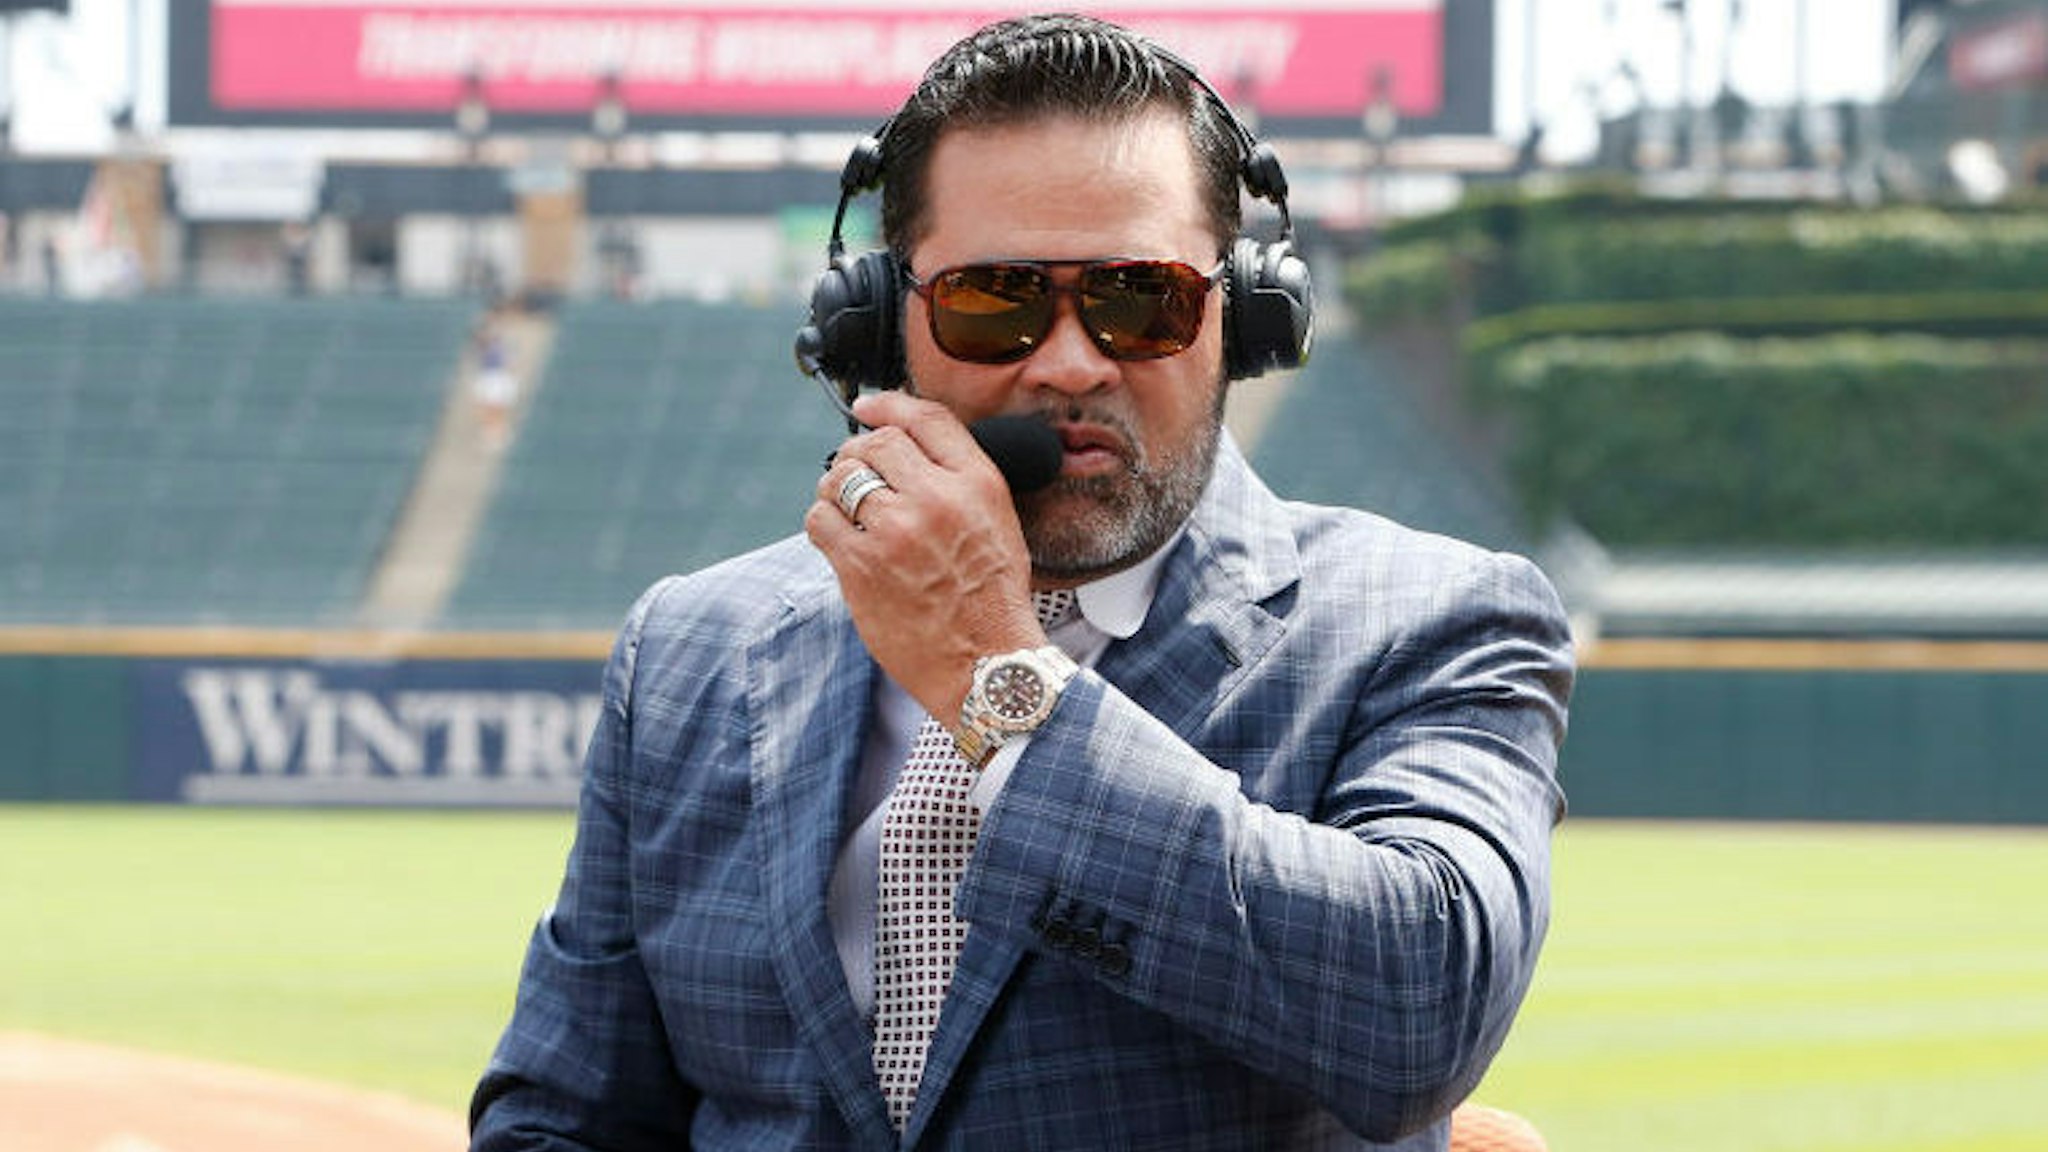 Former Chicago White Sox manager Ozzie Guillen prior to the start of the game between t he Chicago White Sox and the Chicago Cubs at Guaranteed Rate Field on July 07, 2019 in Chicago, Illinois.